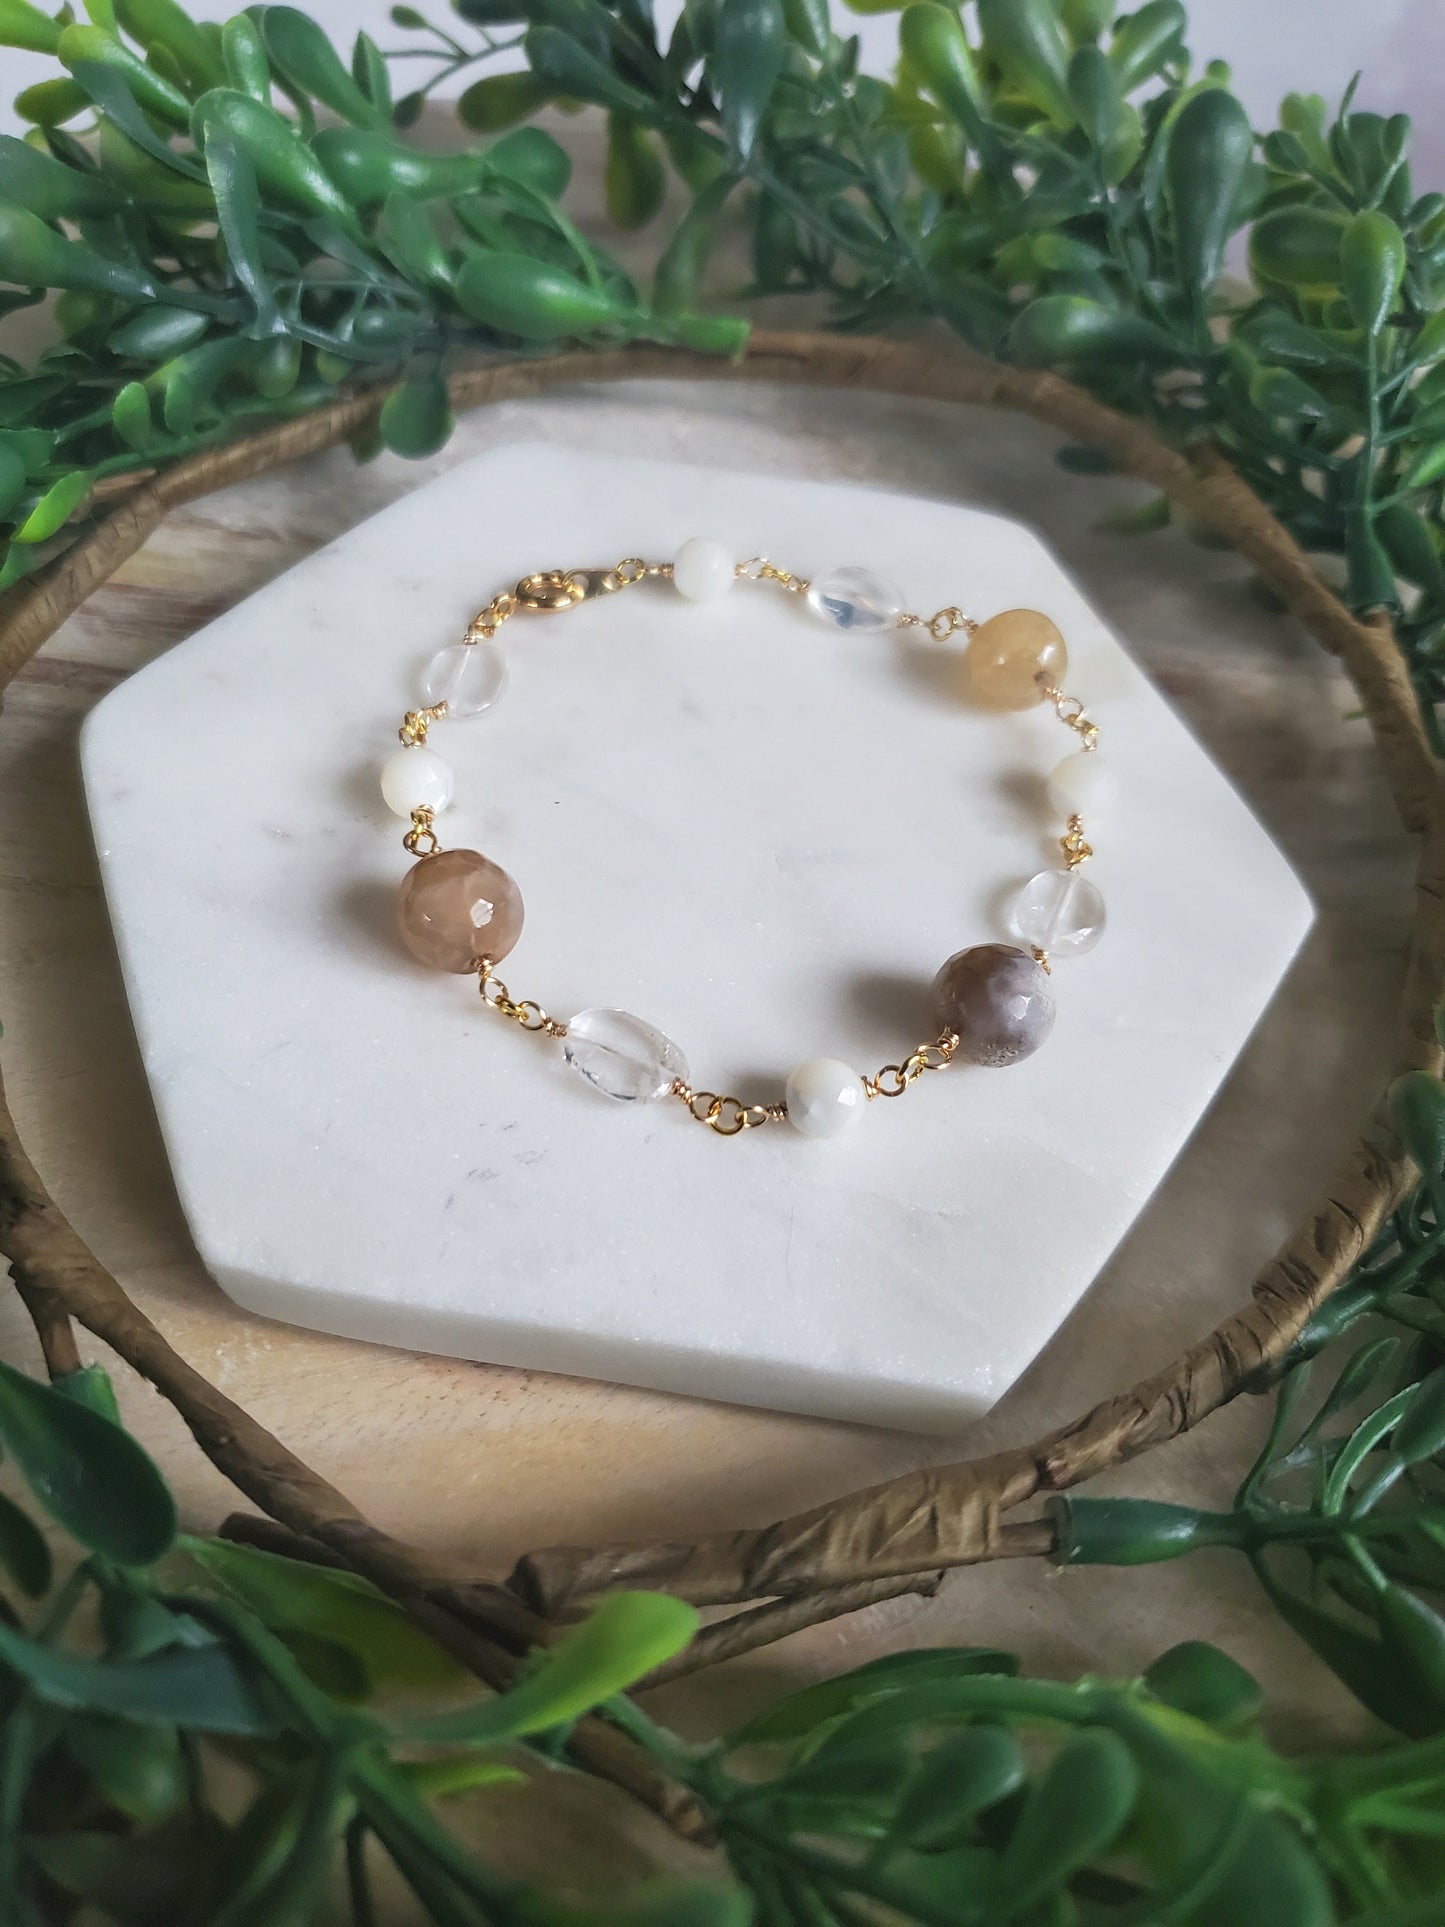 Quartz, Agate and Mother of Pearl Bracelet